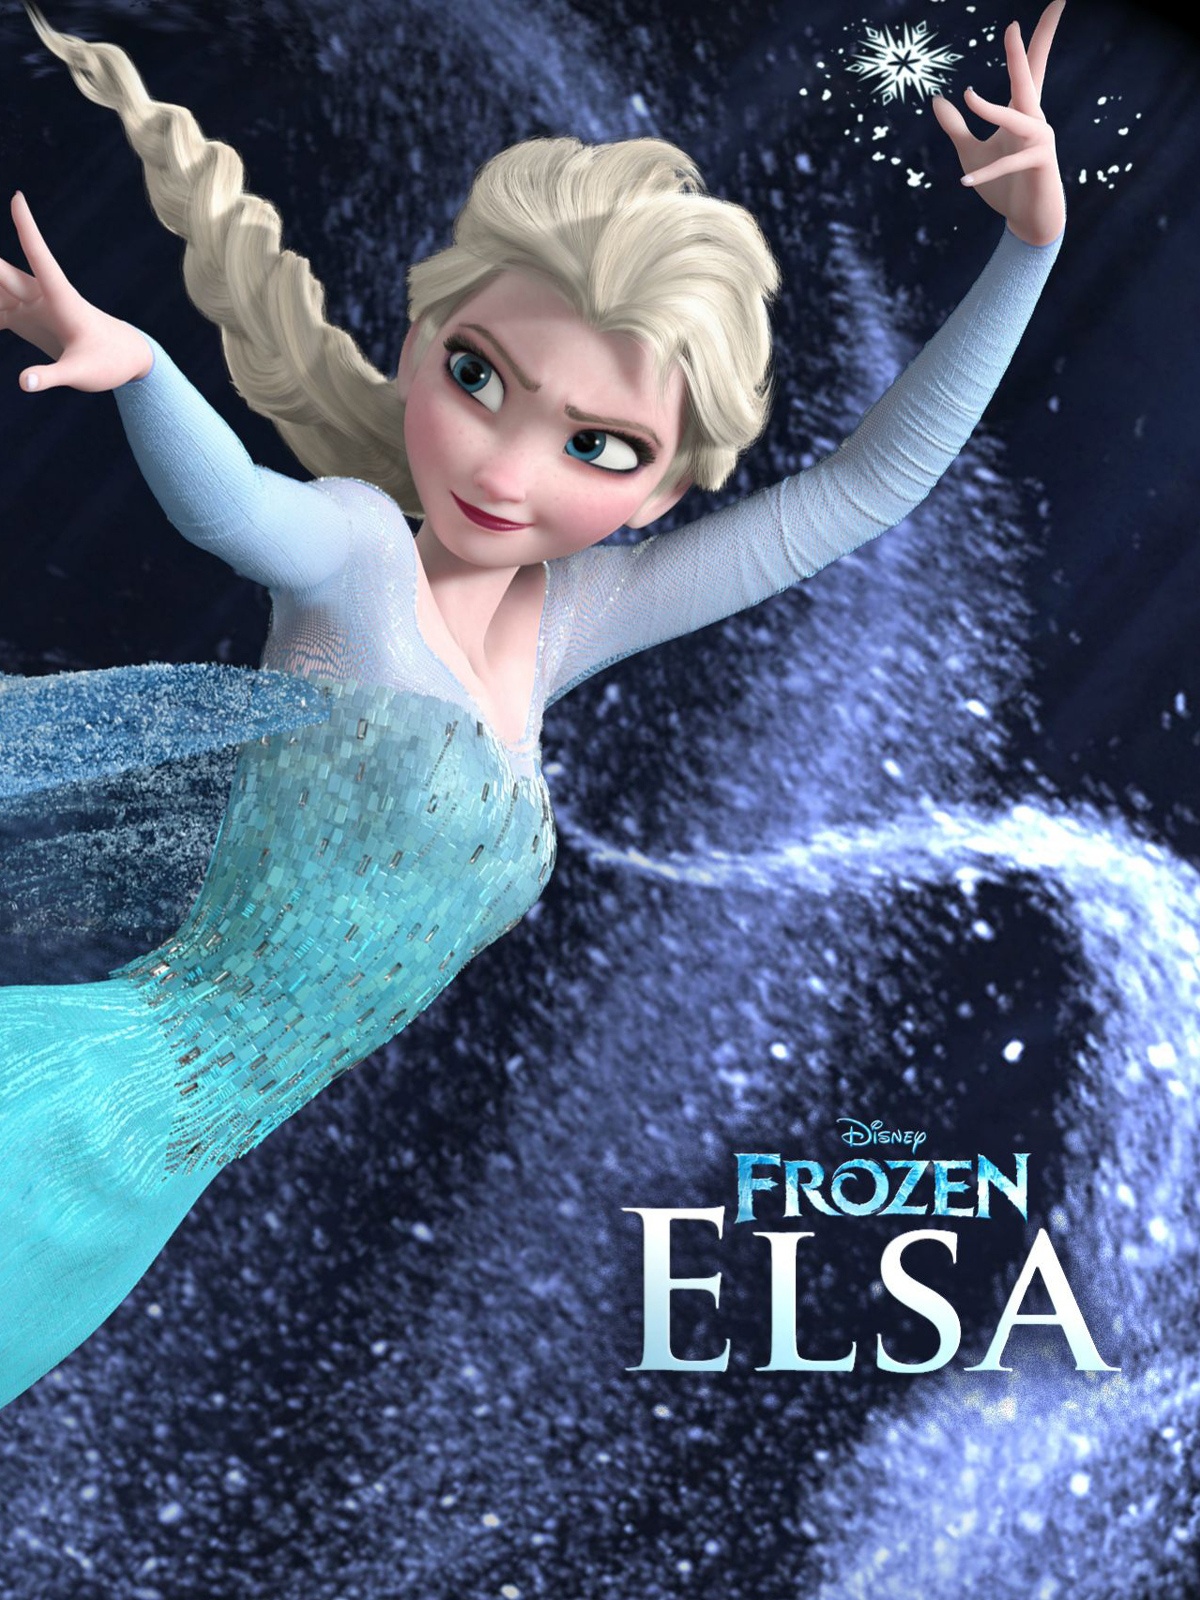 Frozen For Phone Wallpapers